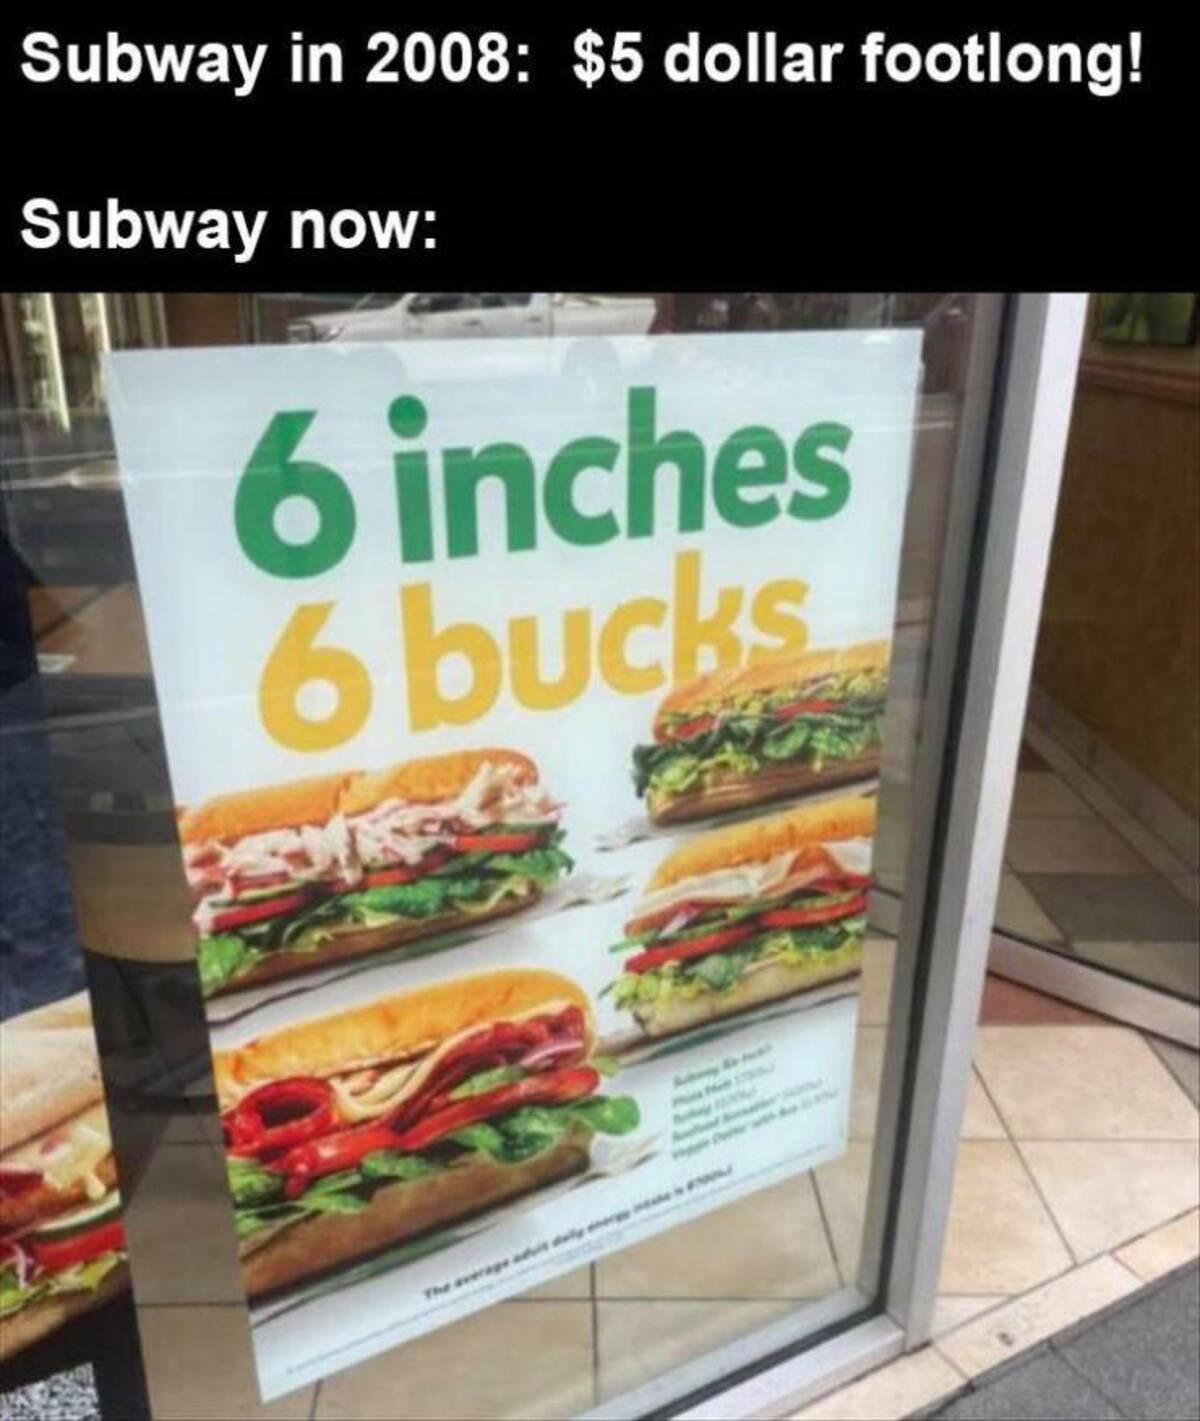 banner - Subway in 2008 $5 dollar footlong! Subway now 6 inches 6 bucks The average adult day y